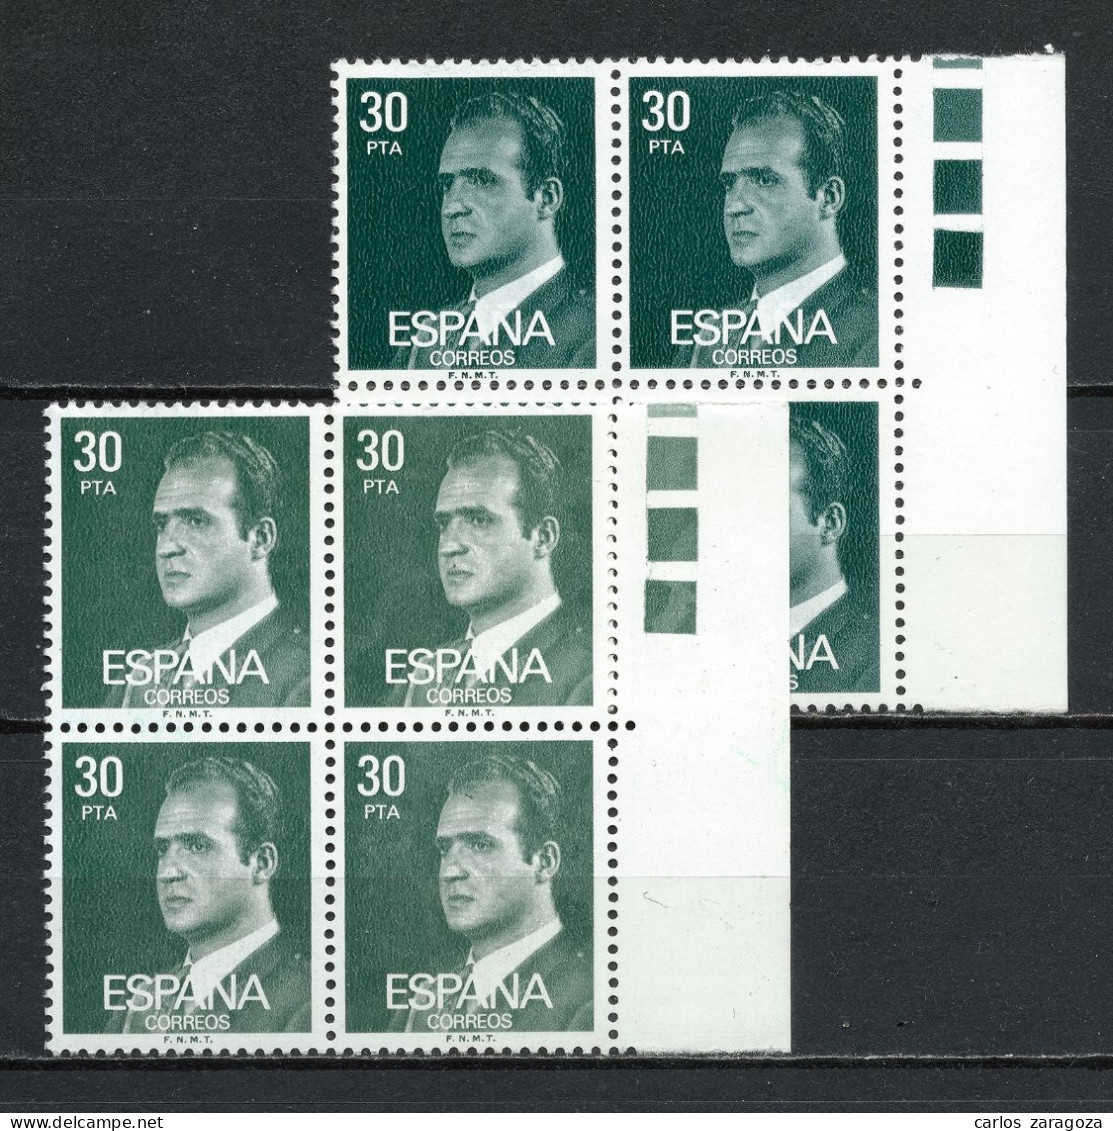 1981 ESPAÑA/SPAIN 2600—JUAN CARLOS #2190 Blocks.MNH Stamps (**) ESPAGNE—Timbres Usage Courant Neufs Yt 2234 NUANCES - Unused Stamps